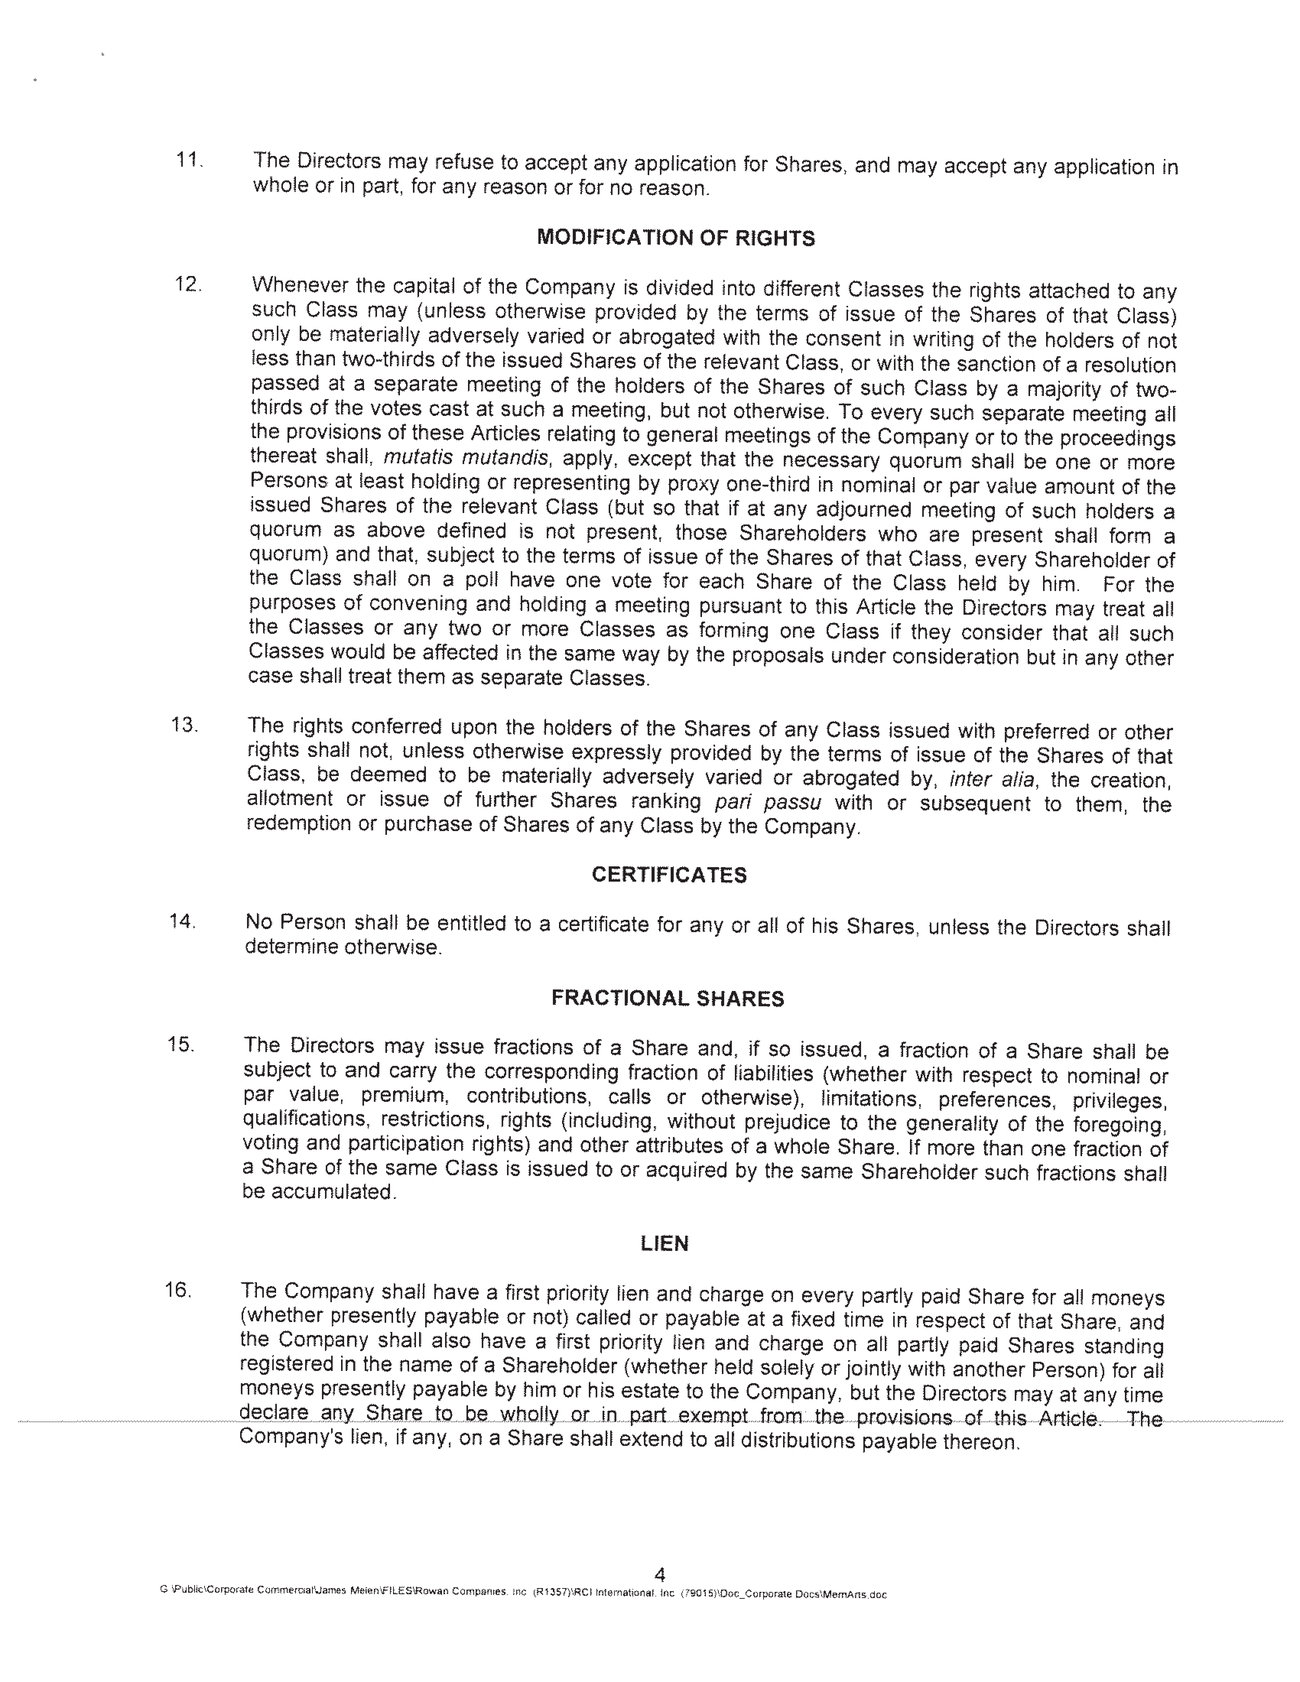 New Microsoft Word Document - Copy_page003page020page001 memorandum and articles of association of rci international inc_page009.jpg